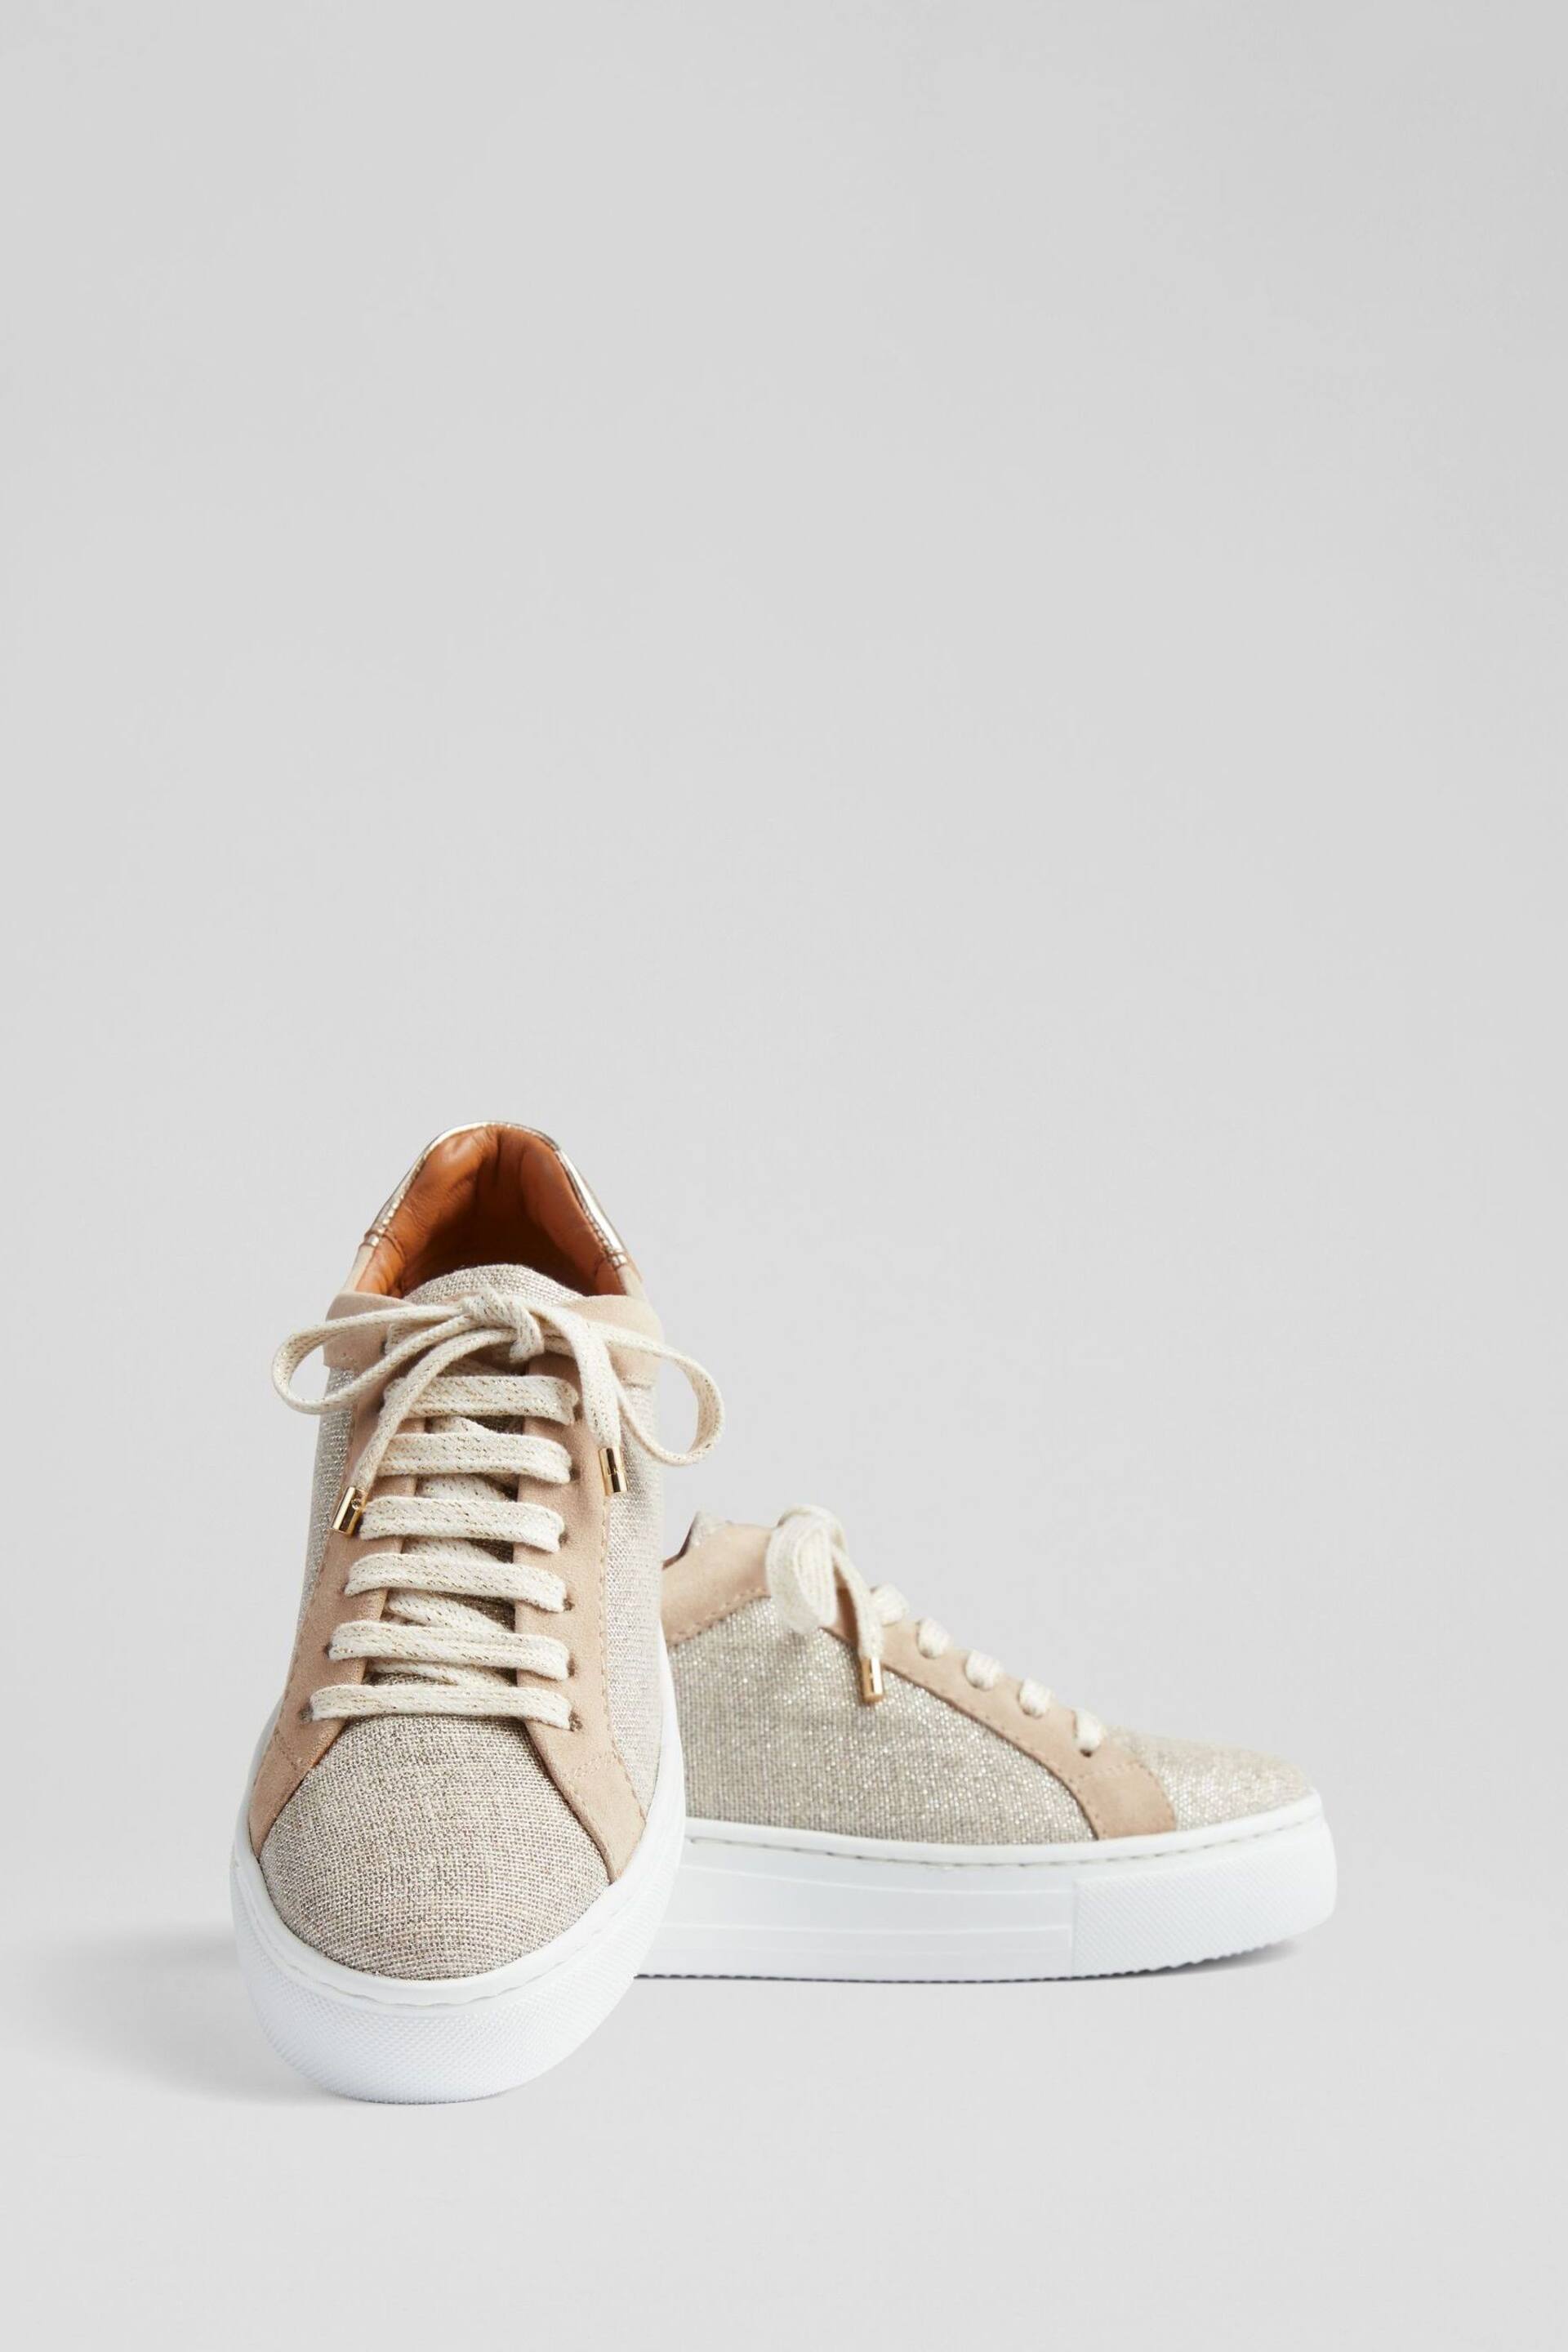 LK Bennett Fabric And Beige Suede Flatform Trainers - Image 3 of 4